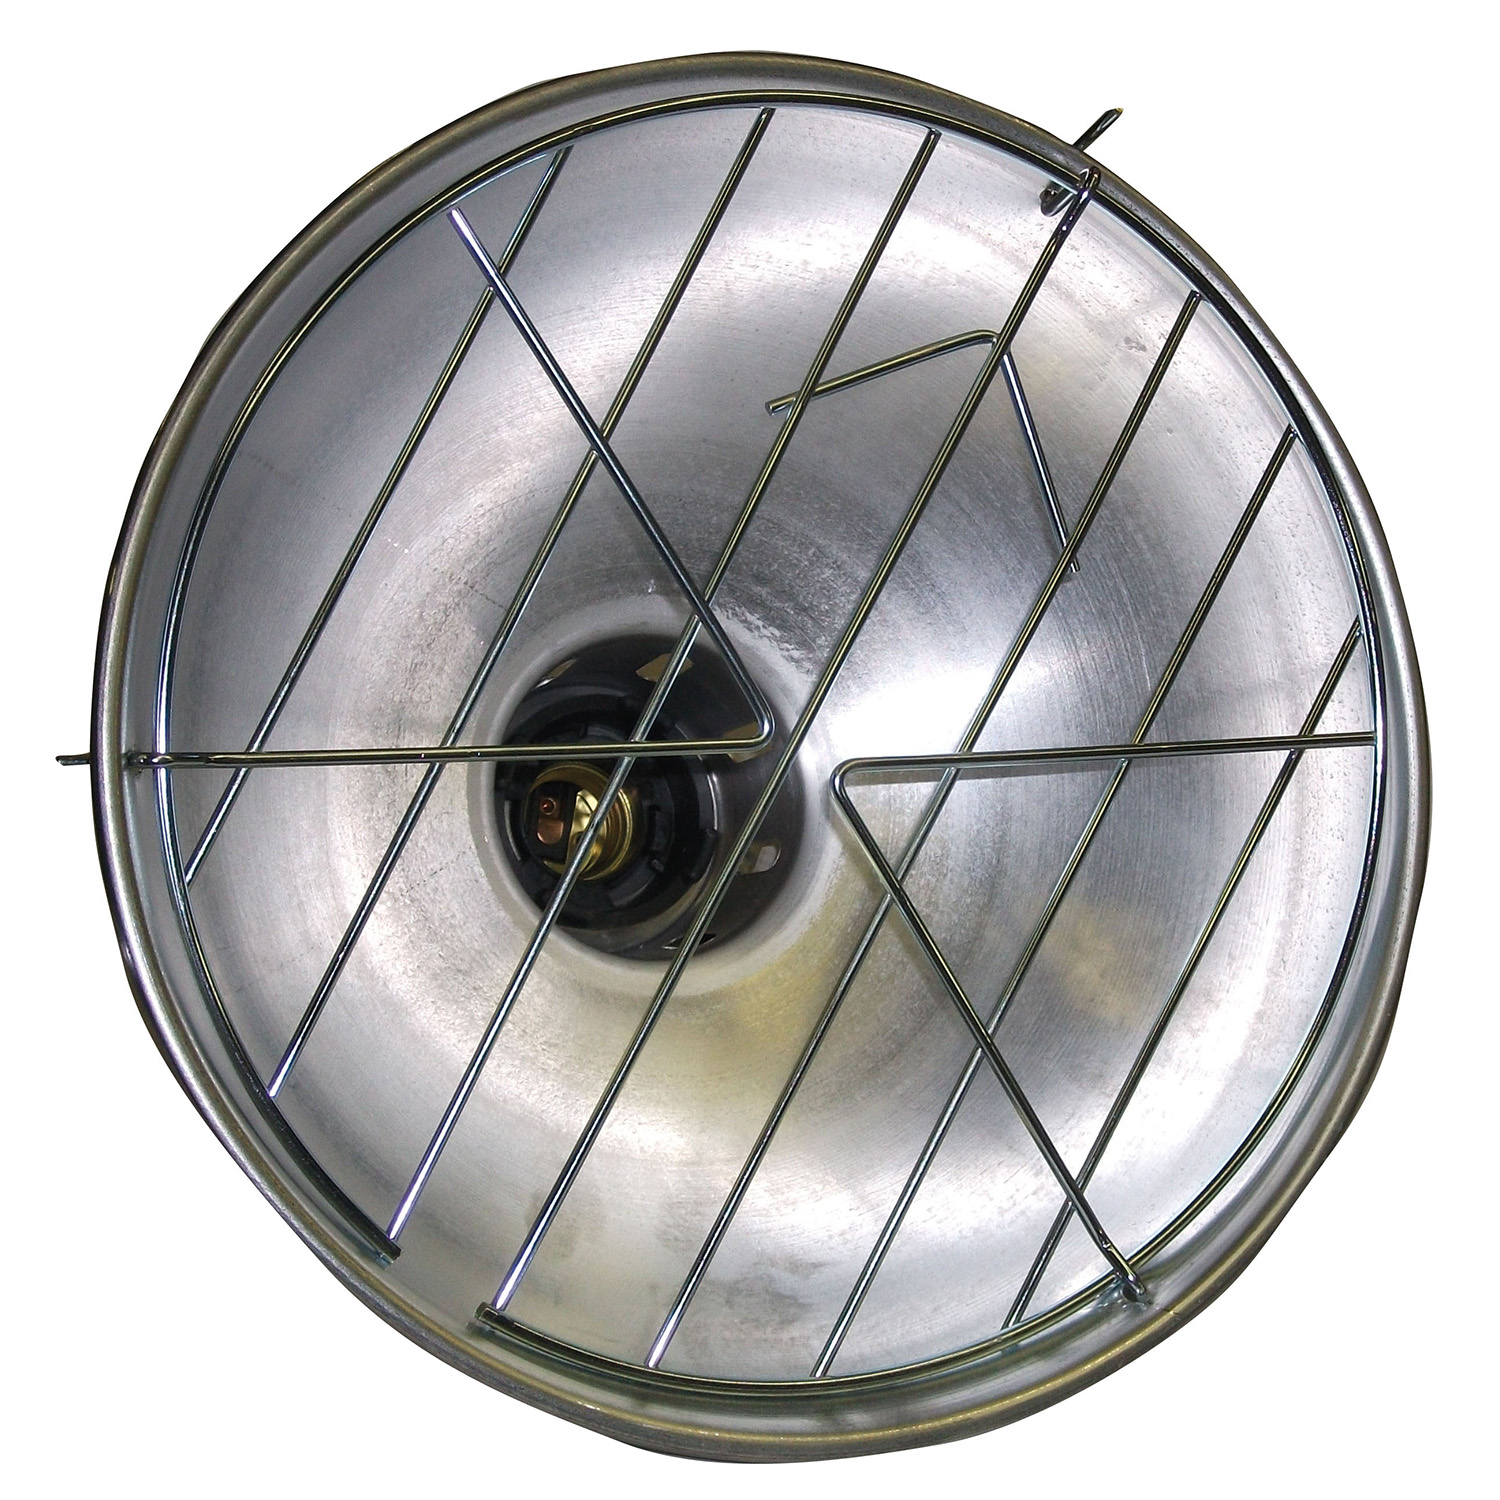 TURNOCK HEAT LAMP WITH DIMMER FITTING